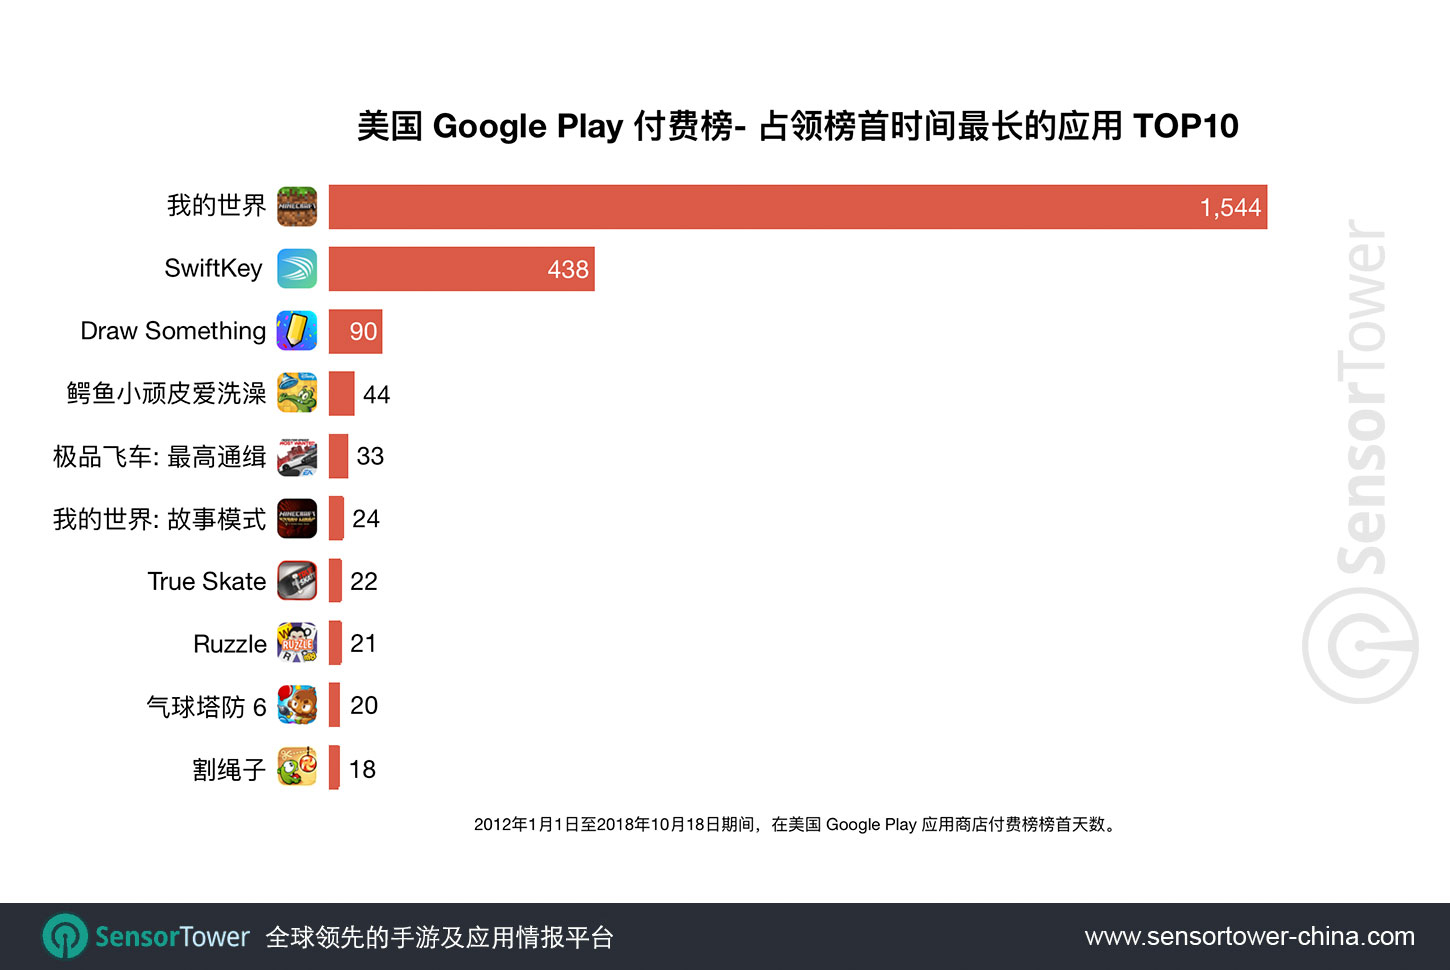 Chart showing a ranking of apps by number of days spent as No. 1 paid app on the U.S. Google Play store